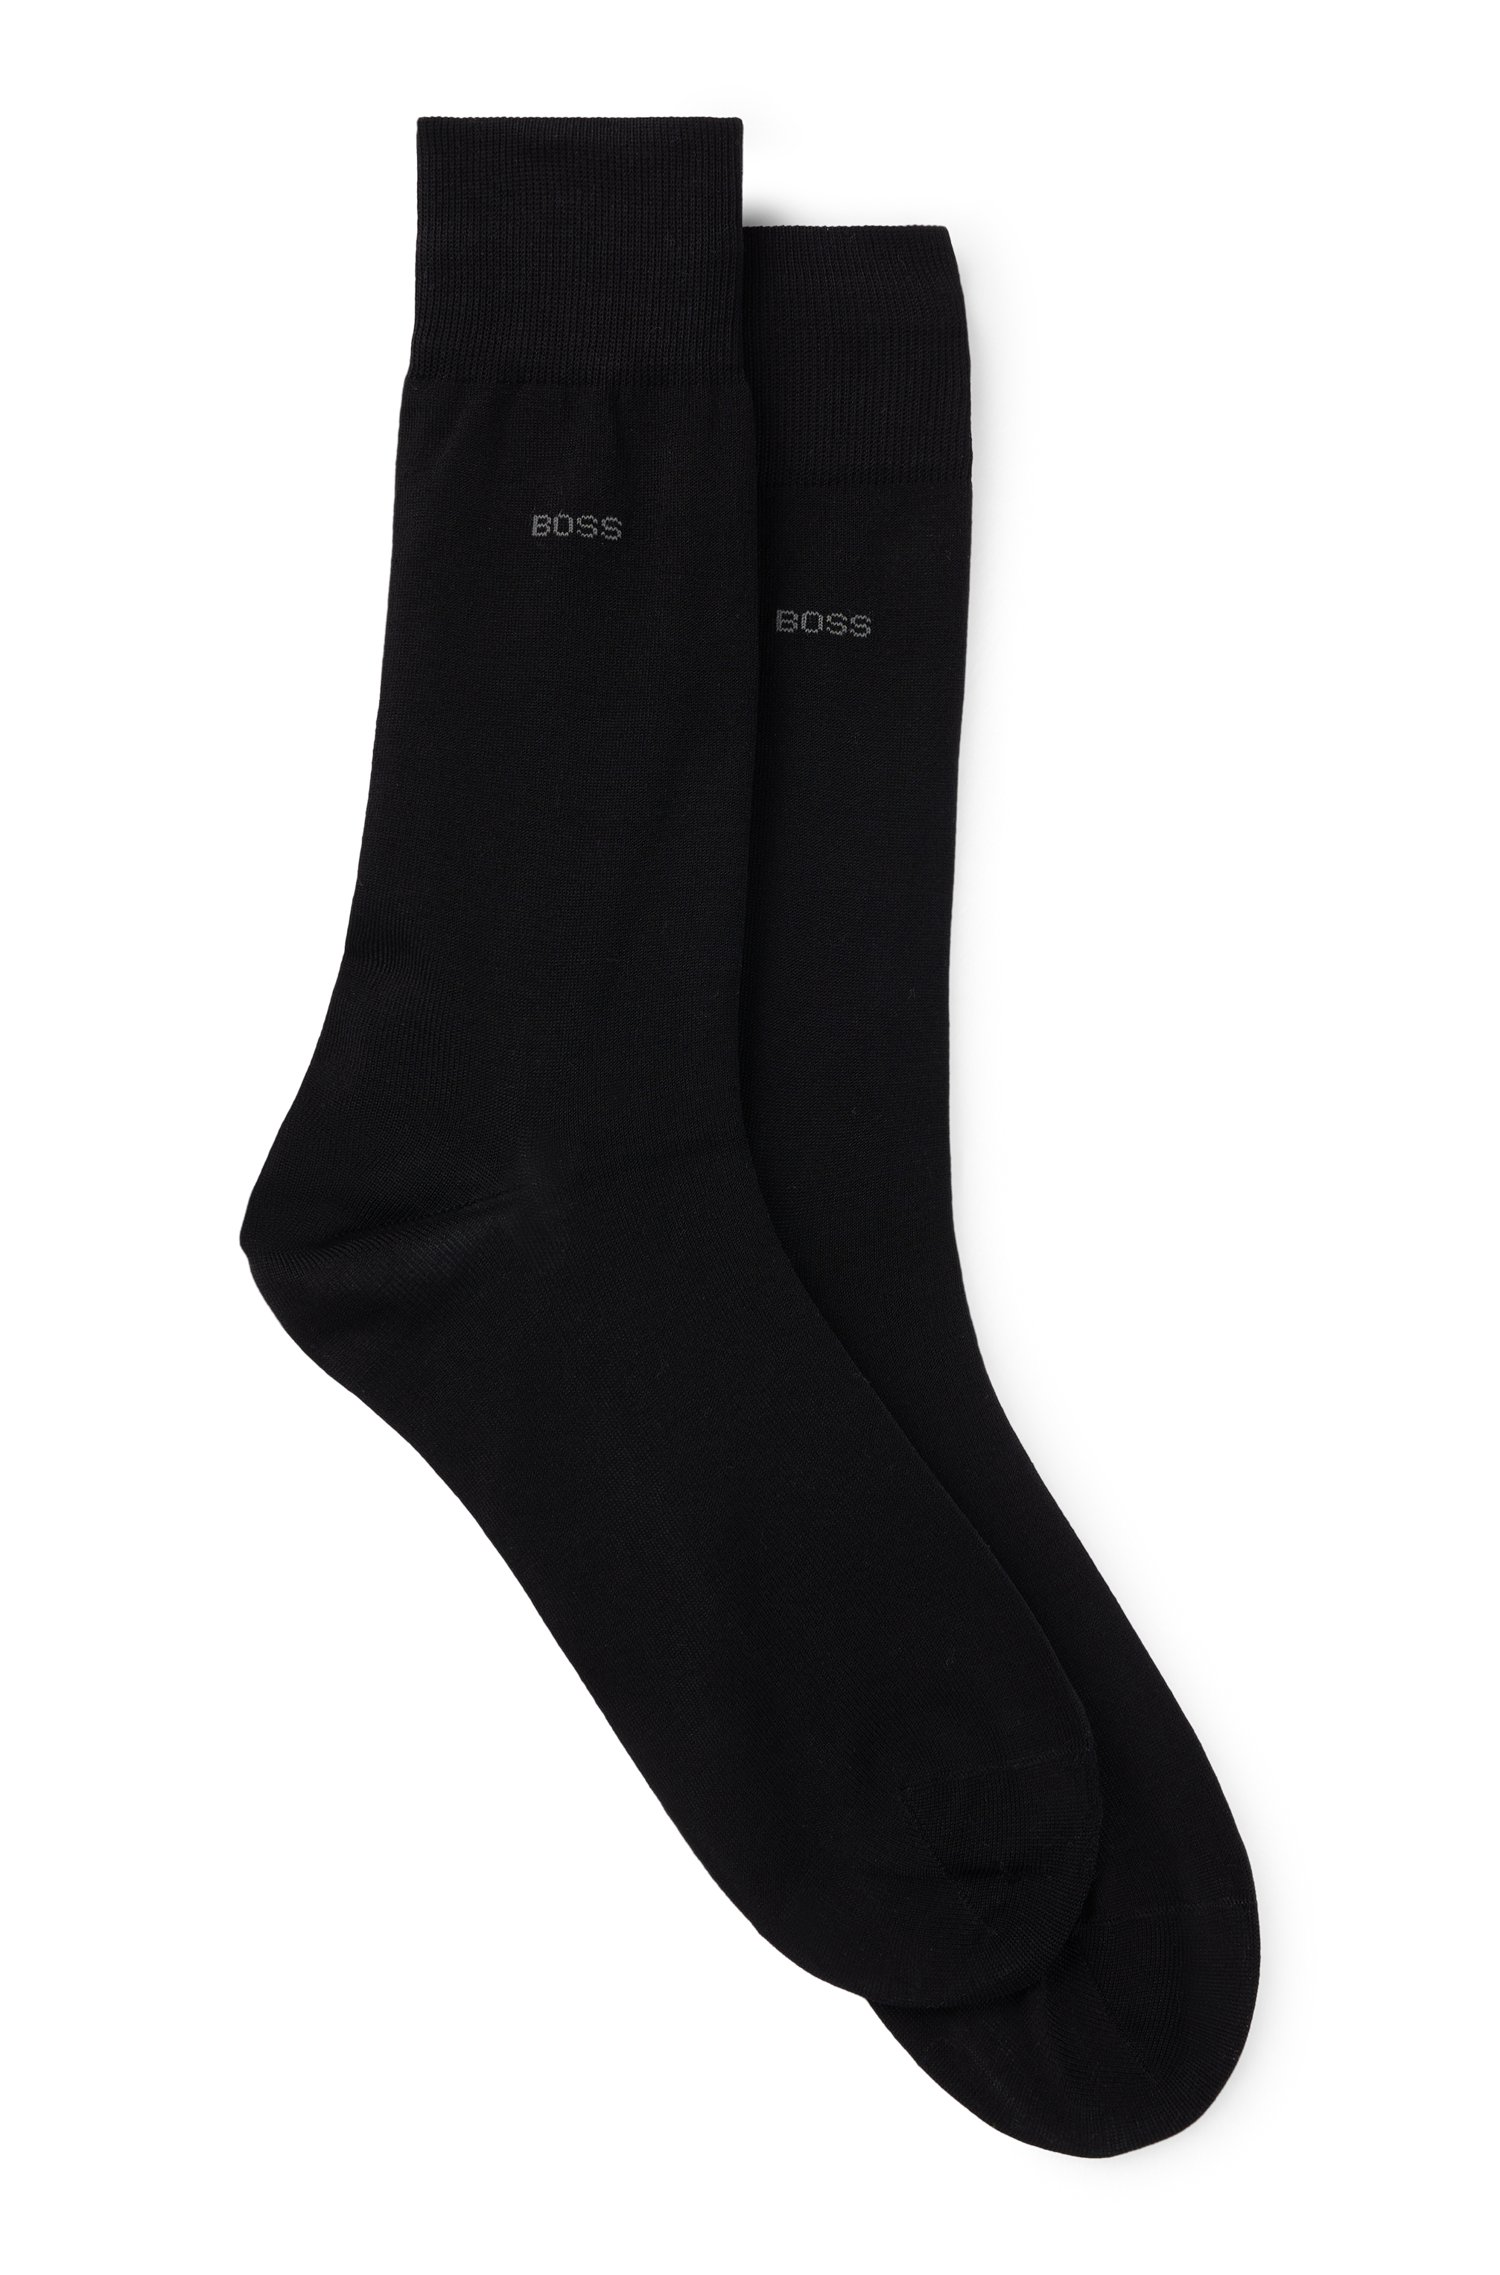 Two-pack of socks in an Egyptian-cotton blend